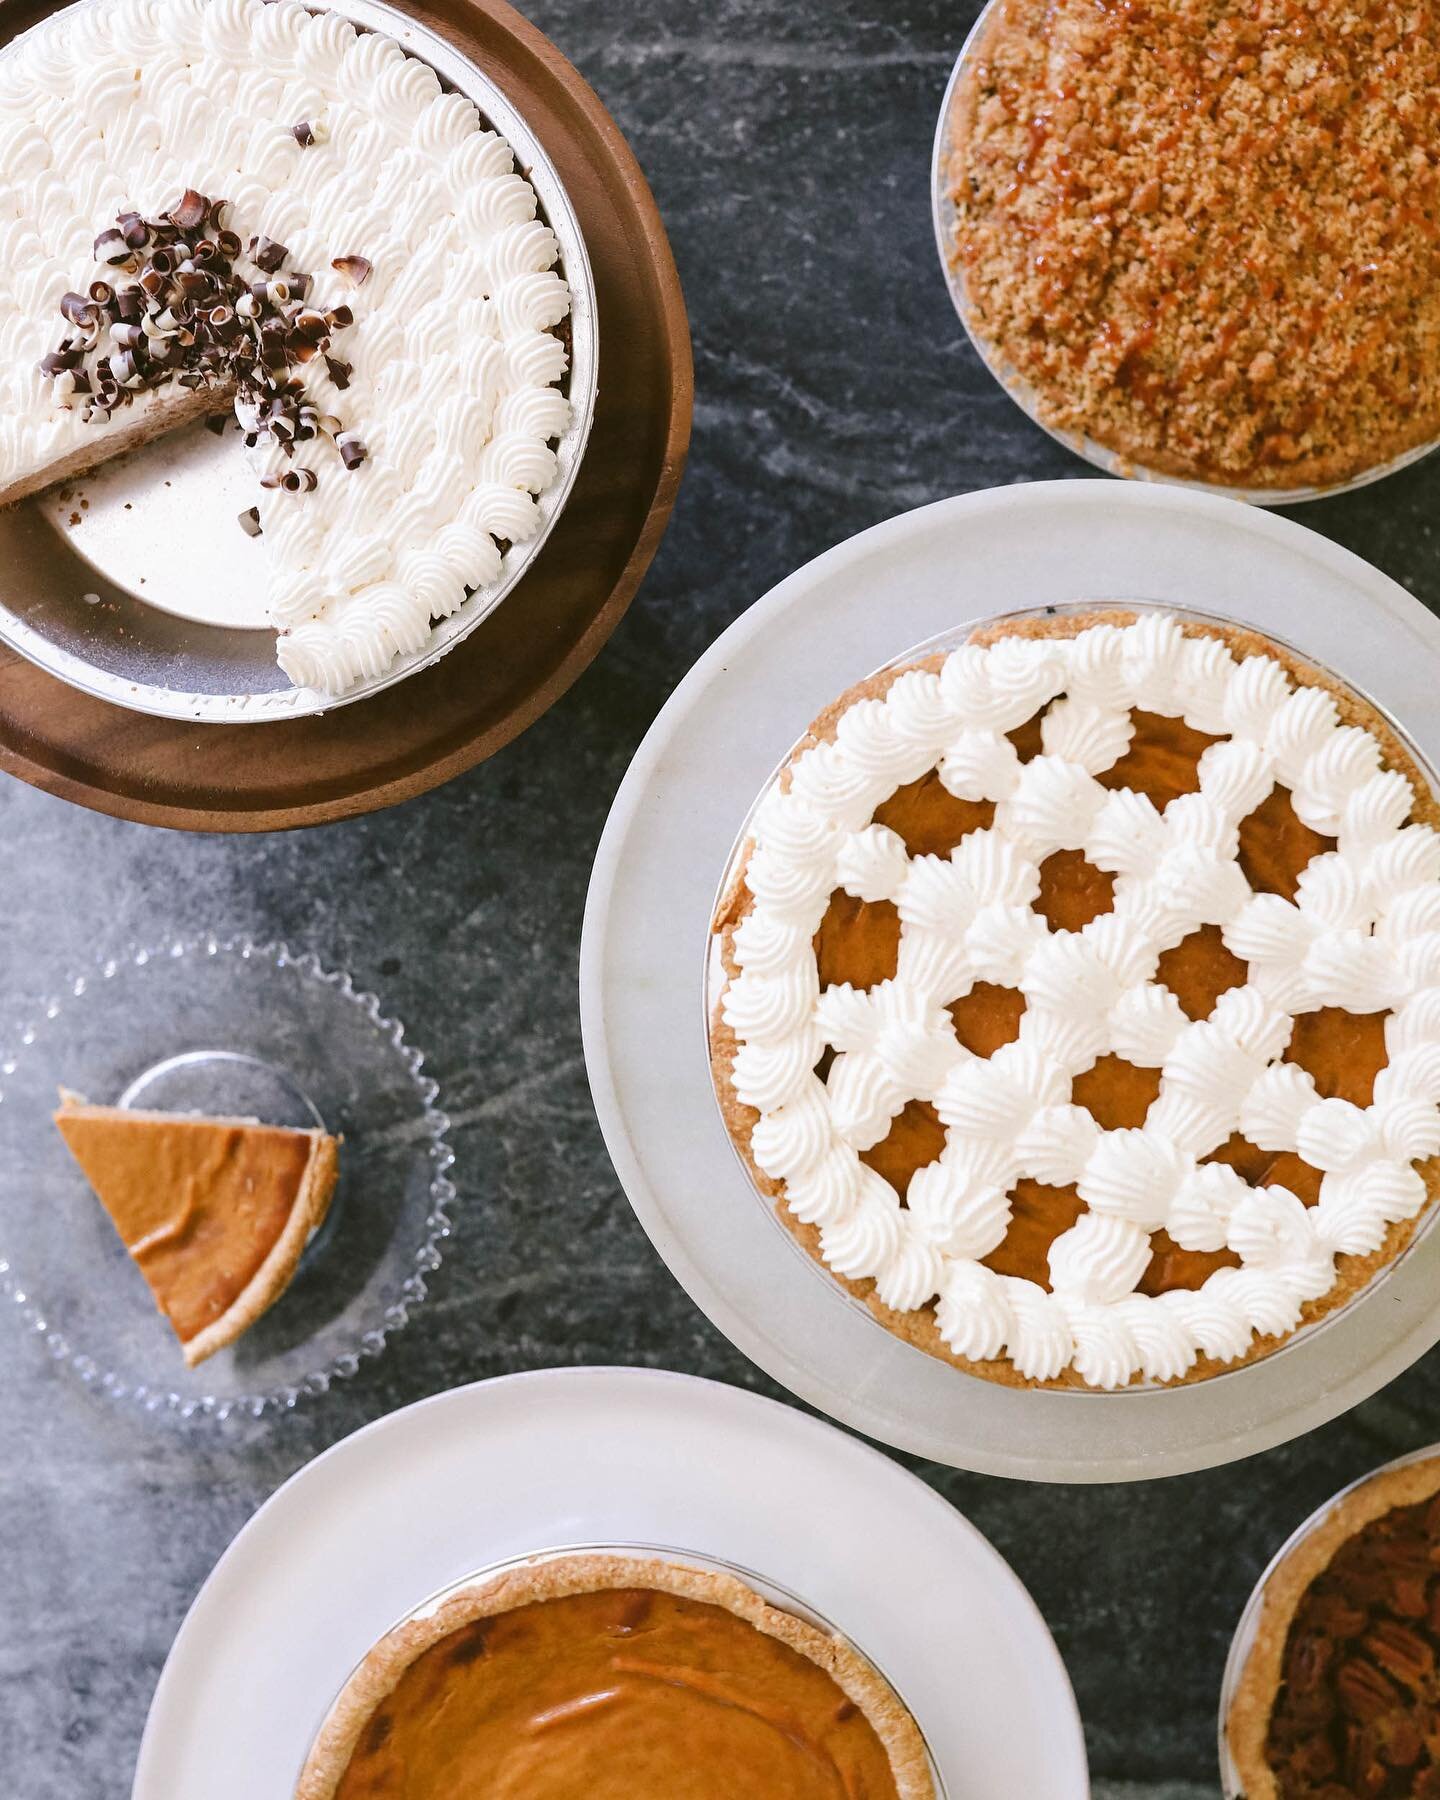 Chocolate truffle silk, pumpkin, caramel apple, pecan..which would you choose??

I&rsquo;ll take a slice of each, please!! 😍

#pie #localpie #MoPie #MoPieCo #asliceabove #giveMolove #giveMopies #buylocal #dessert #KansasCity #baking #bakingfromscrat